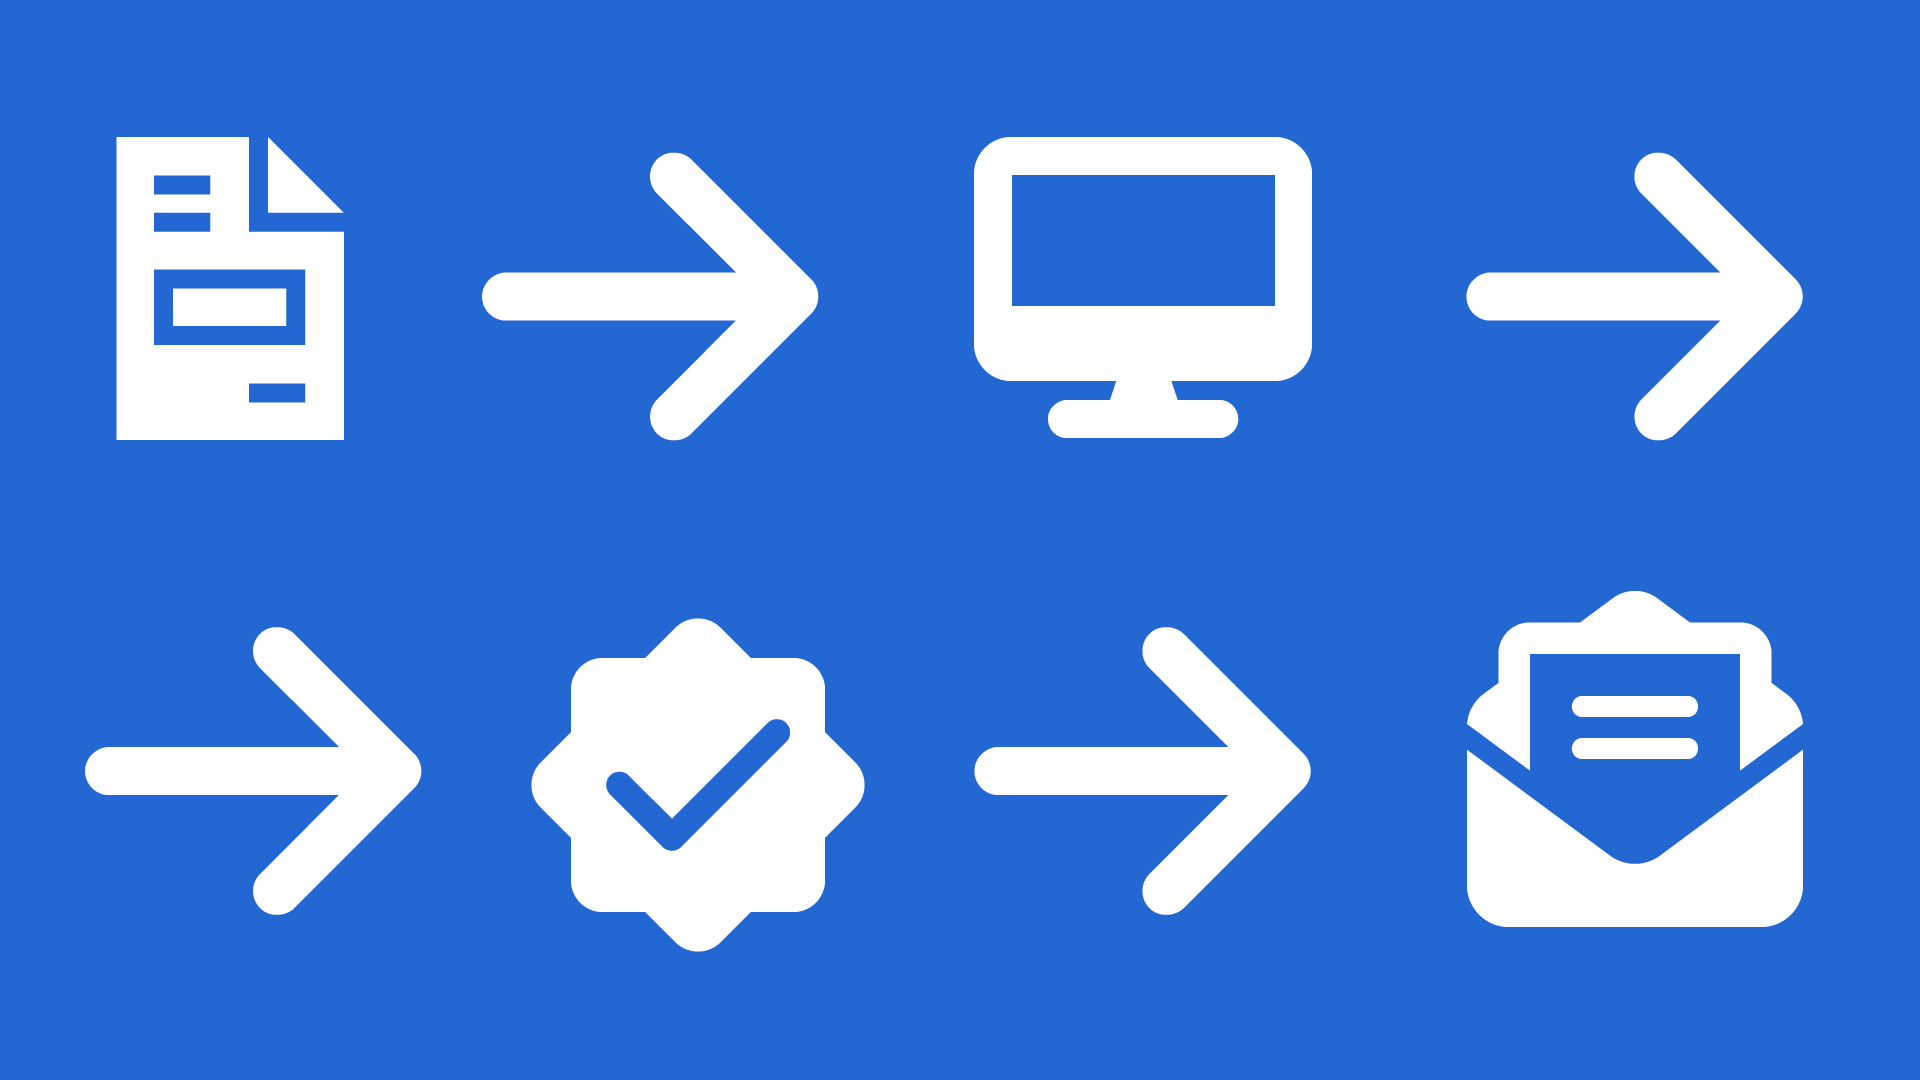 Grid of icons including document, arrows, seal of approval, computer, and mail